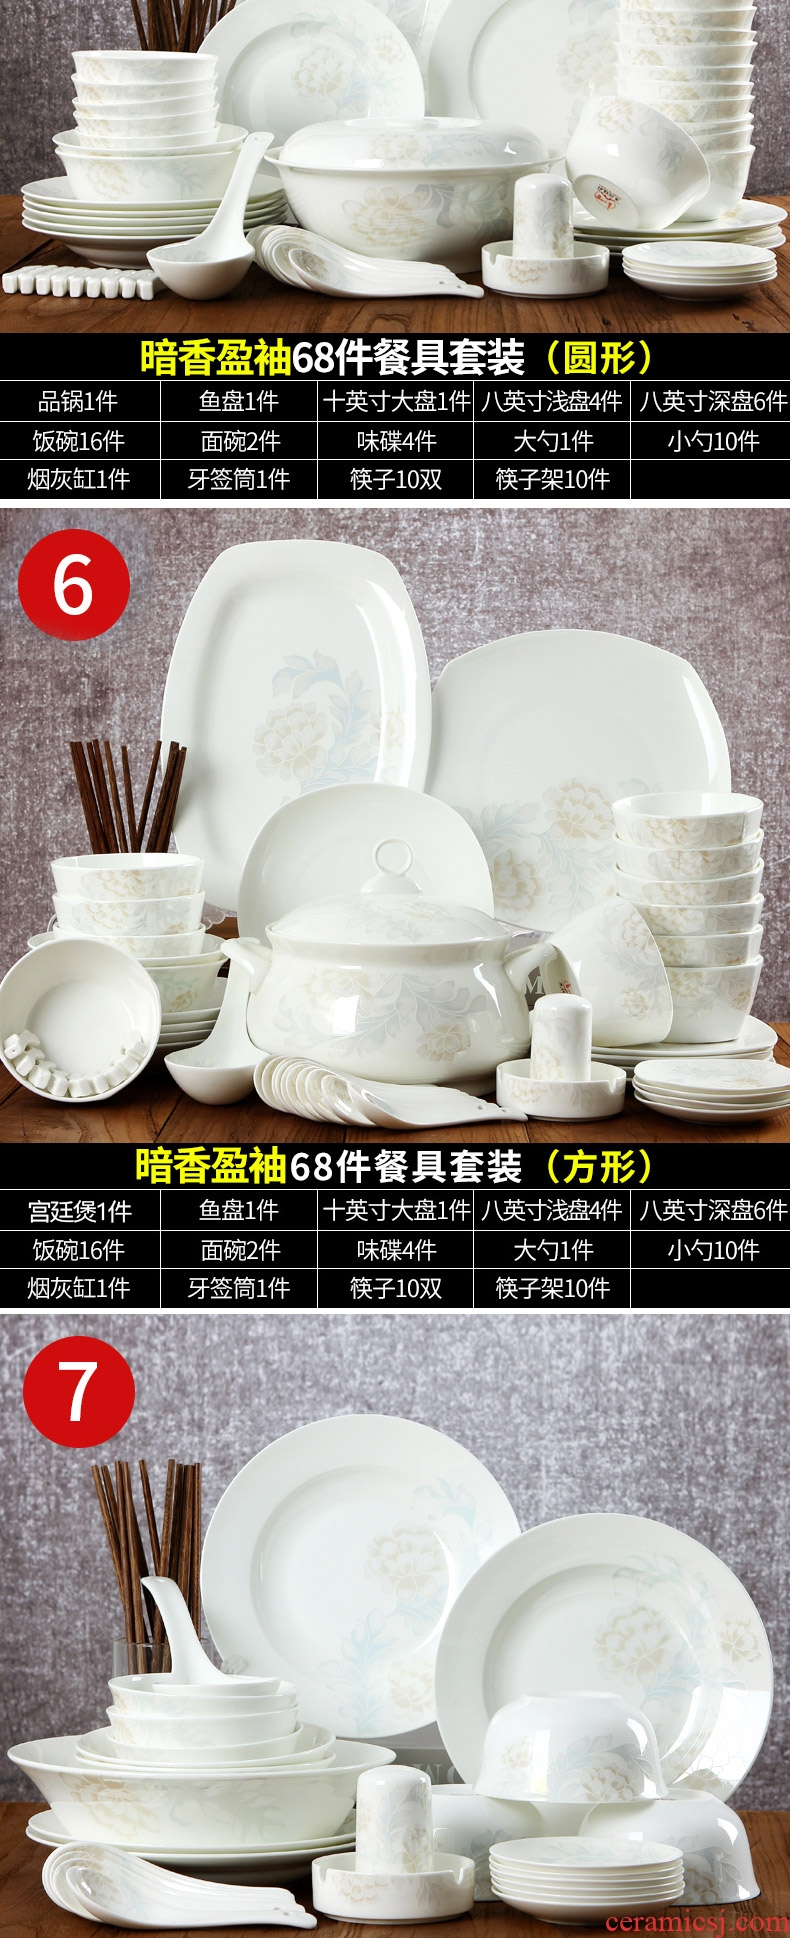 Jingdezhen ceramics tableware household eat simple bone bowls dish suits Chinese style new combination plate spoon chopsticks